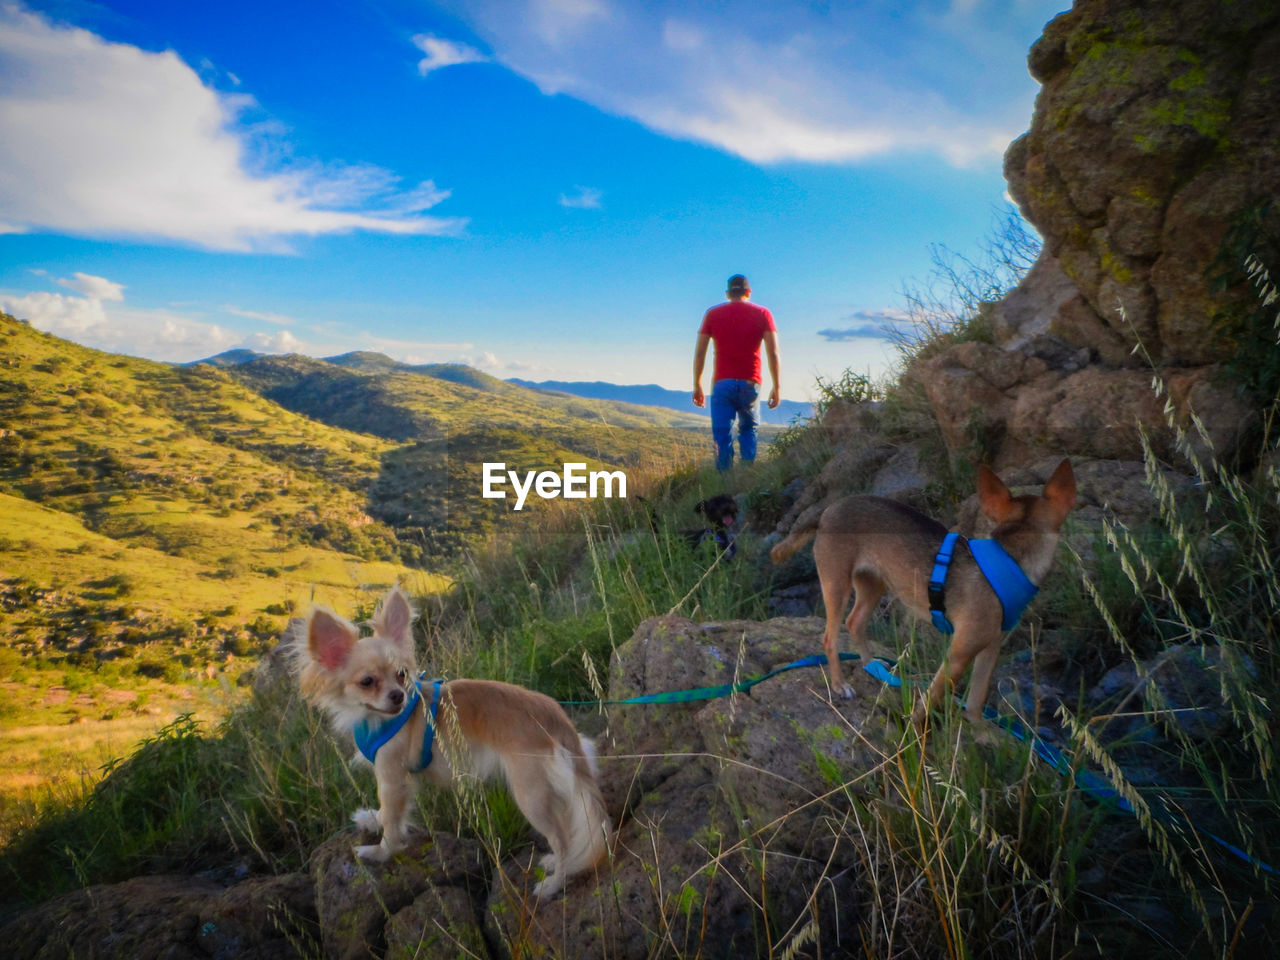 Dogs standing on rock while man walking in background